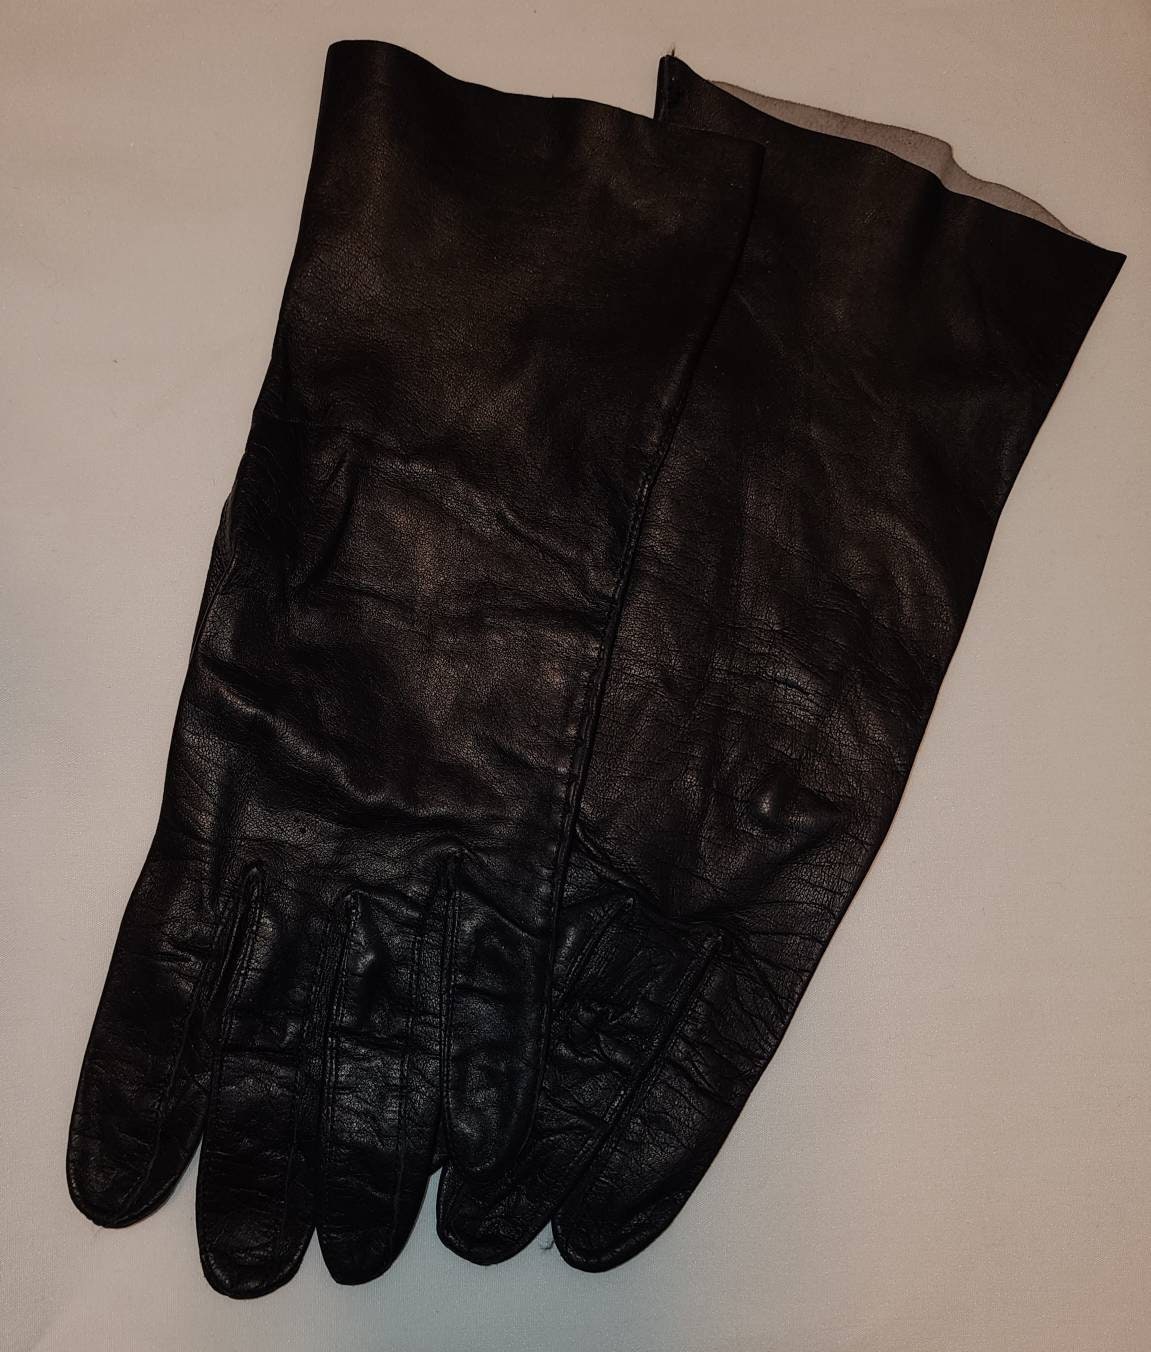 Vintage Leather Gloves 1950s Thin Black Leather Midlength Gloves Mid Century Rockabilly 7